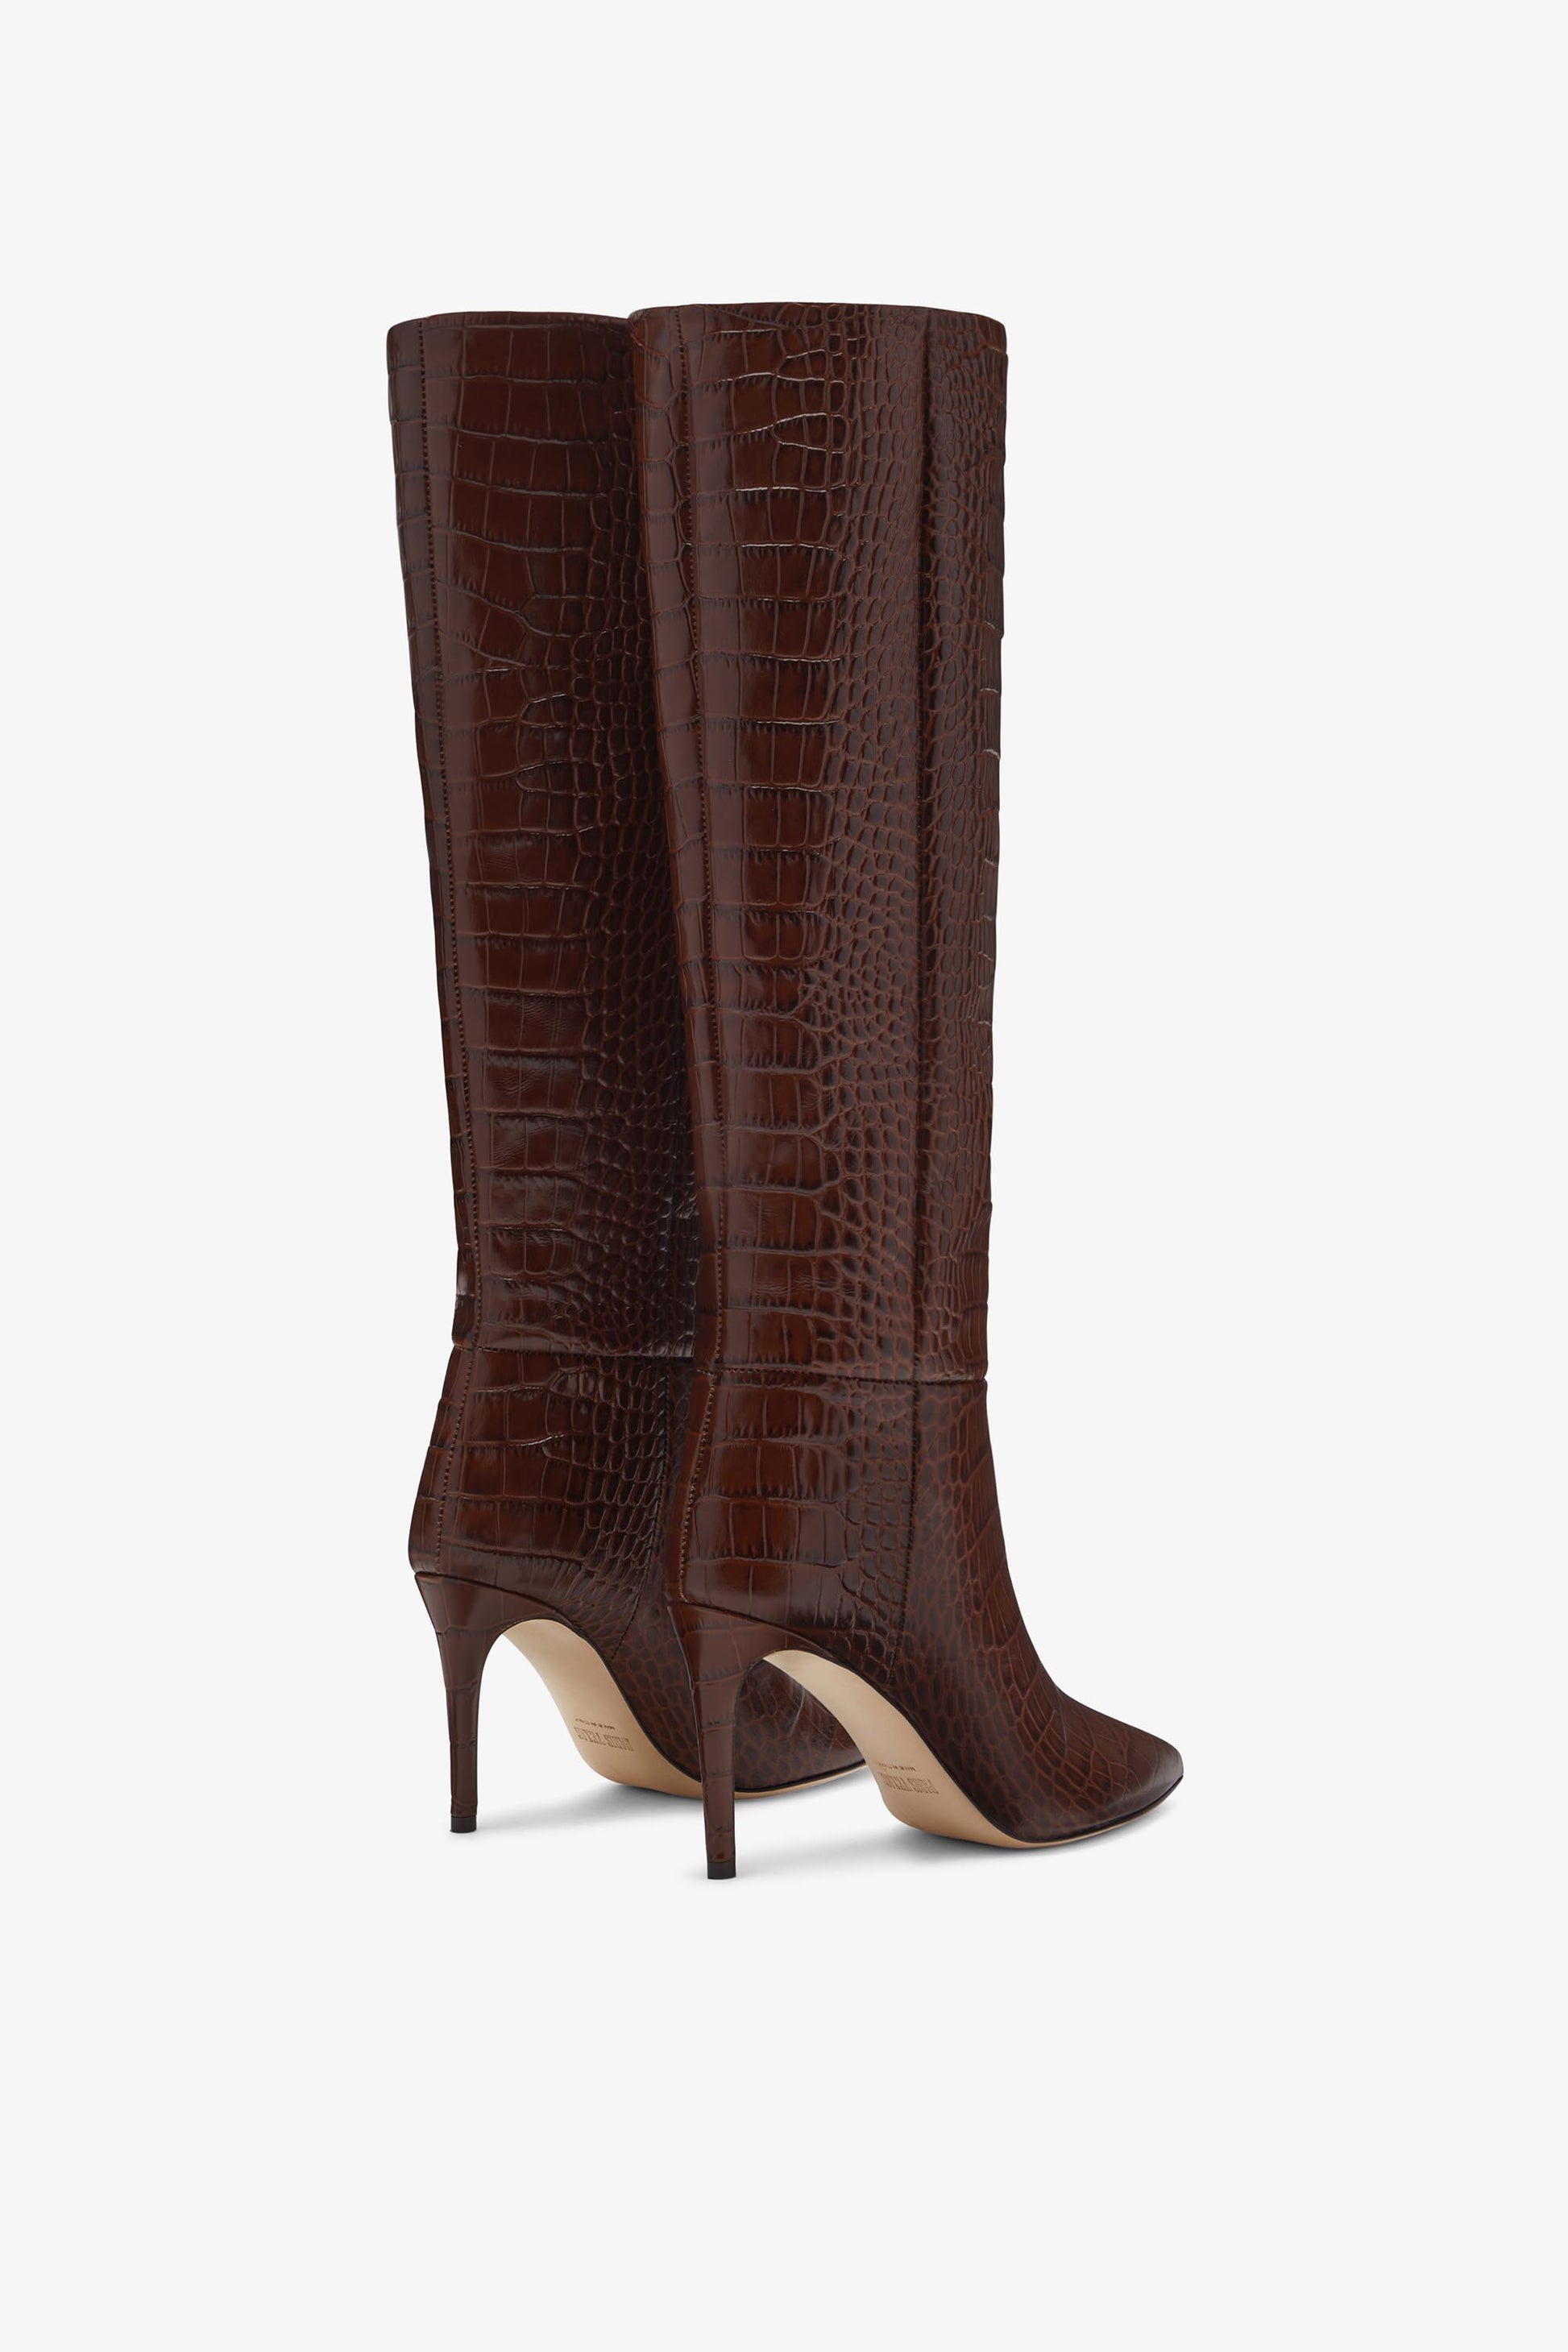 Chocolate brown croc-effect leather heel 85 boots